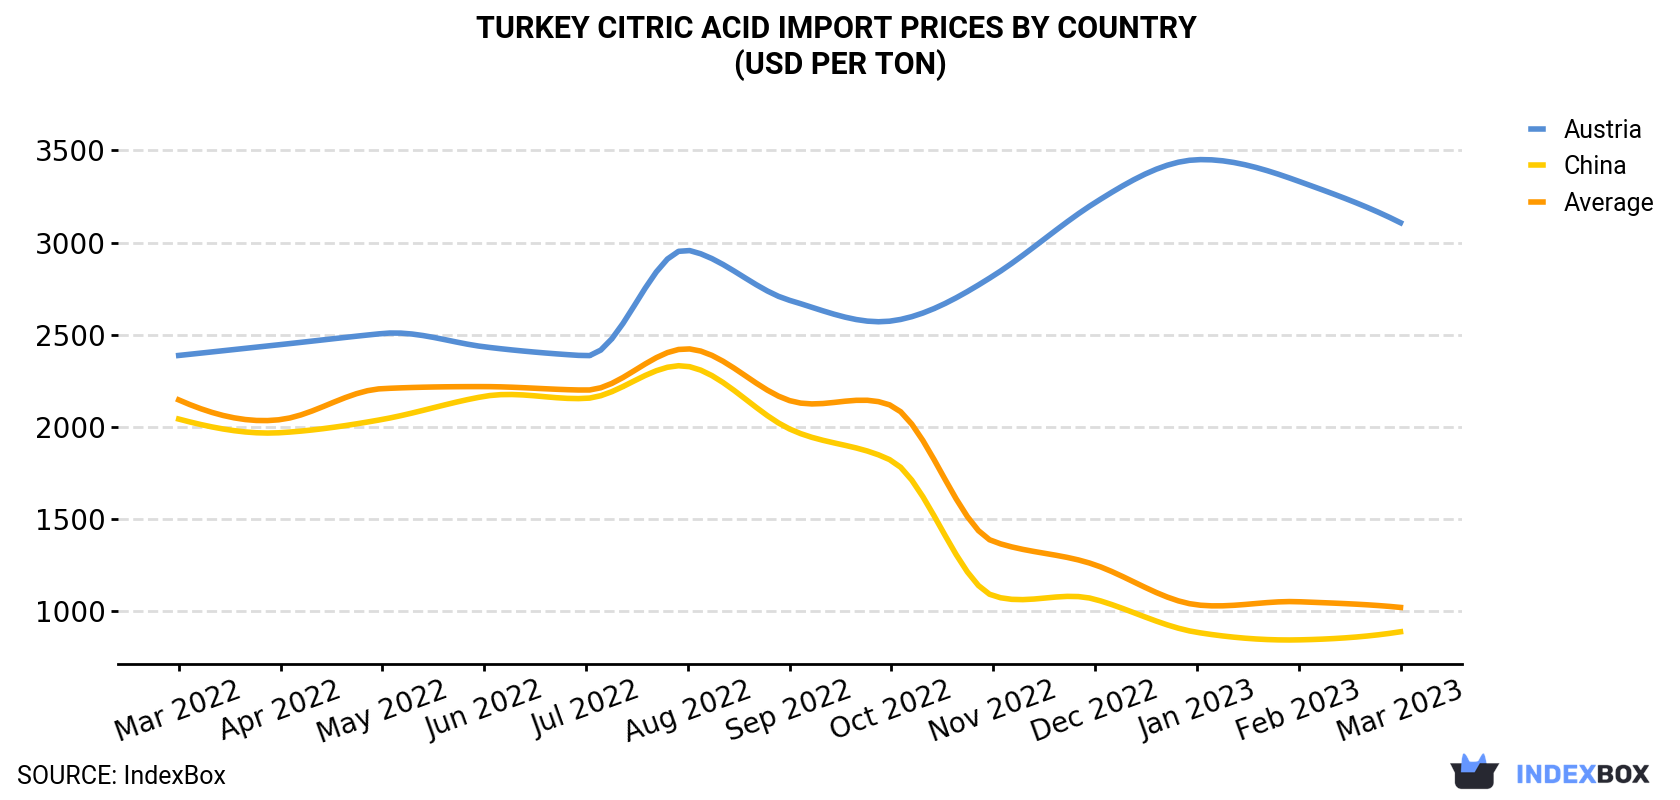 Turkey Citric Acid Import Prices By Country (USD Per Ton)